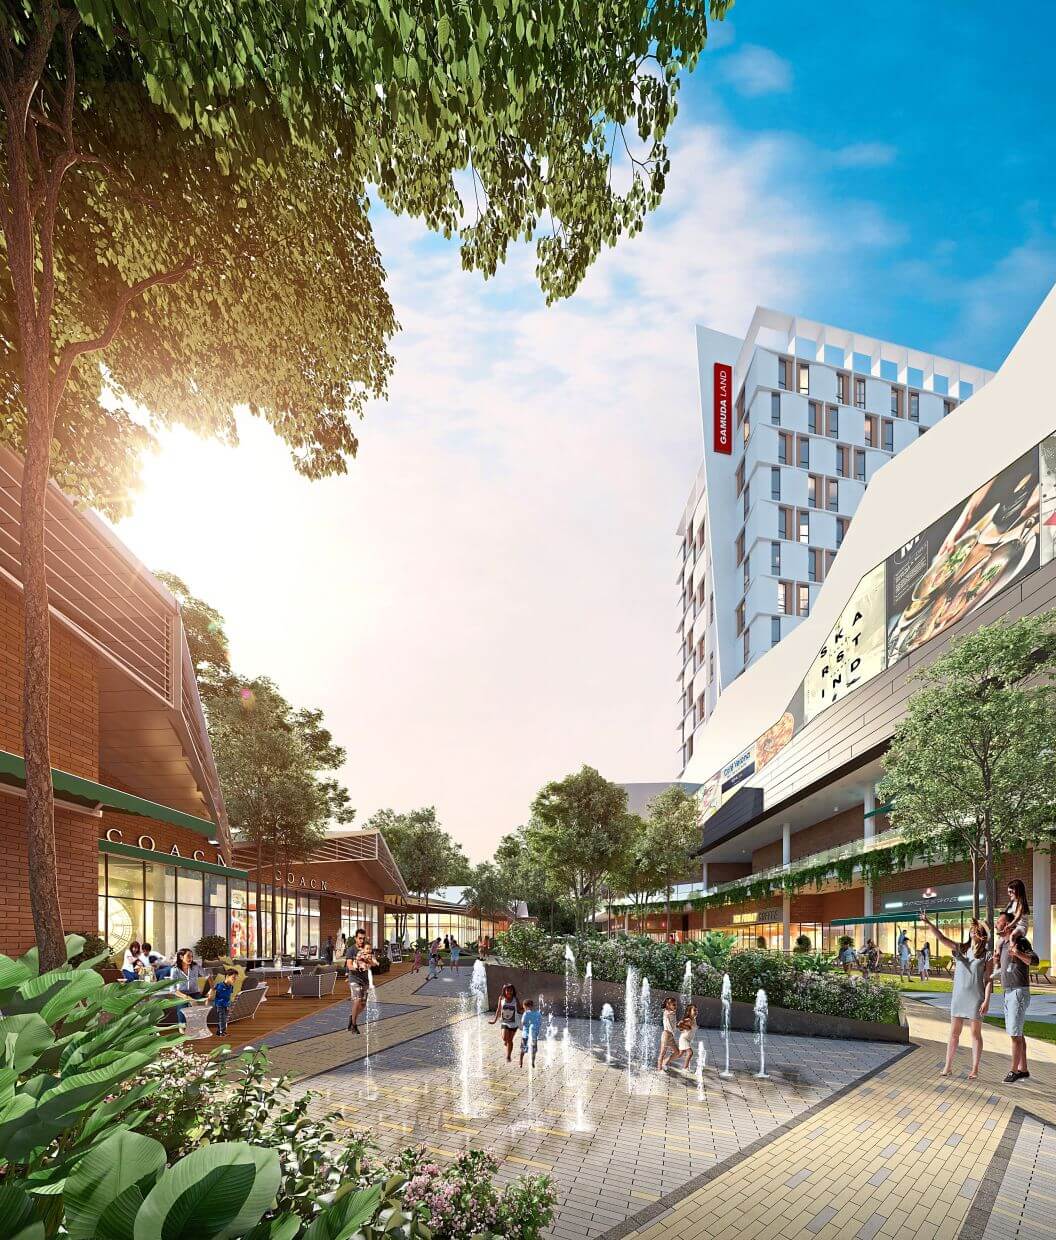 Quayside Mall’s design addresses growing demand for open retail spaces post-lockdown.